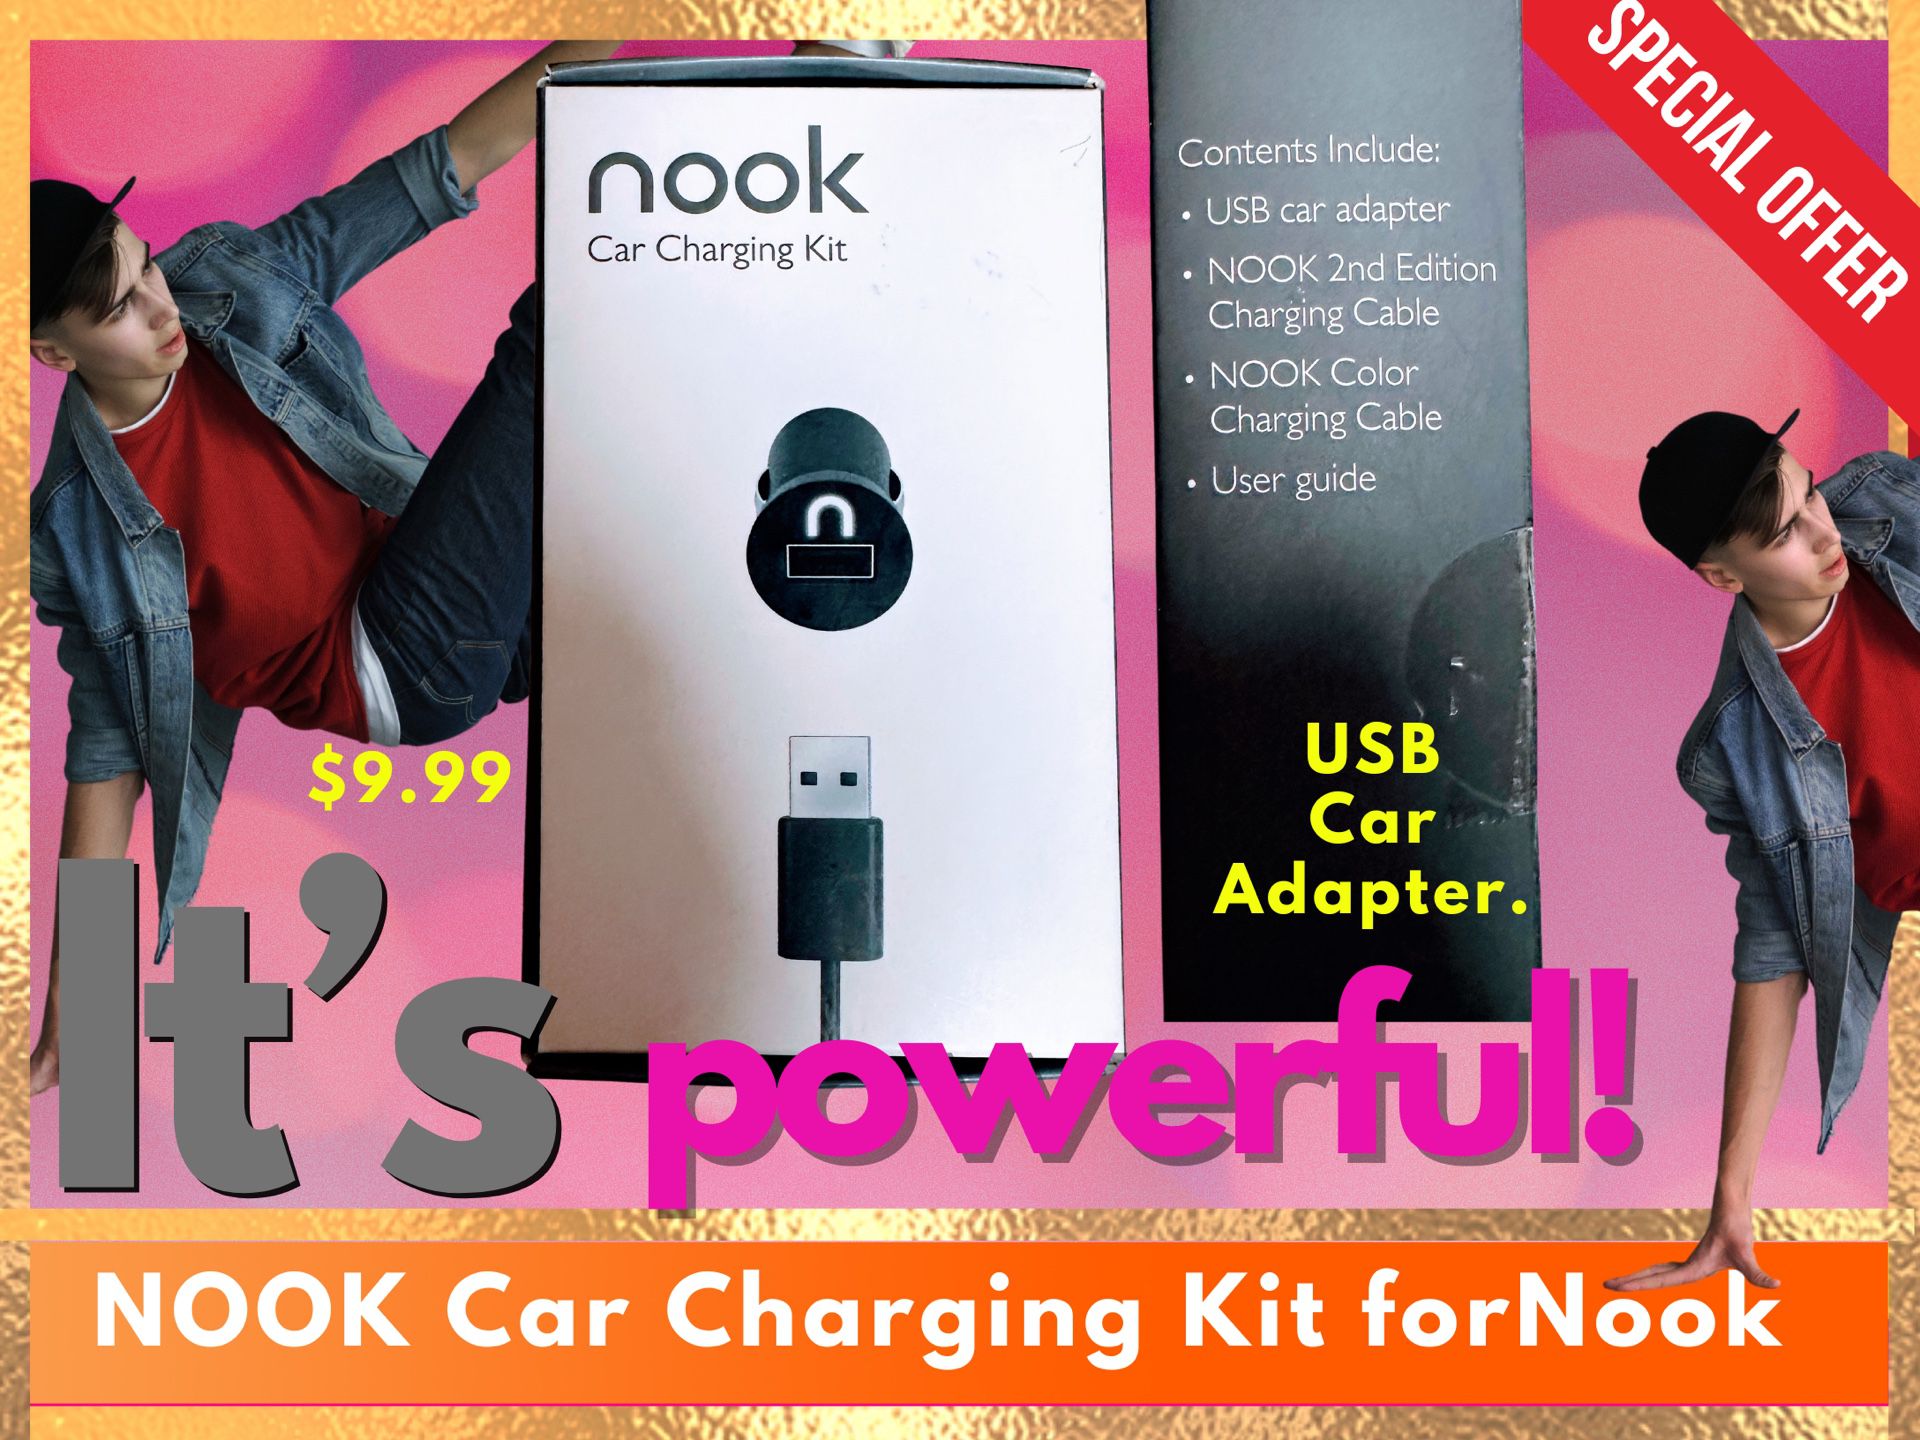 Nock Car Charger/ NEW In Box/.